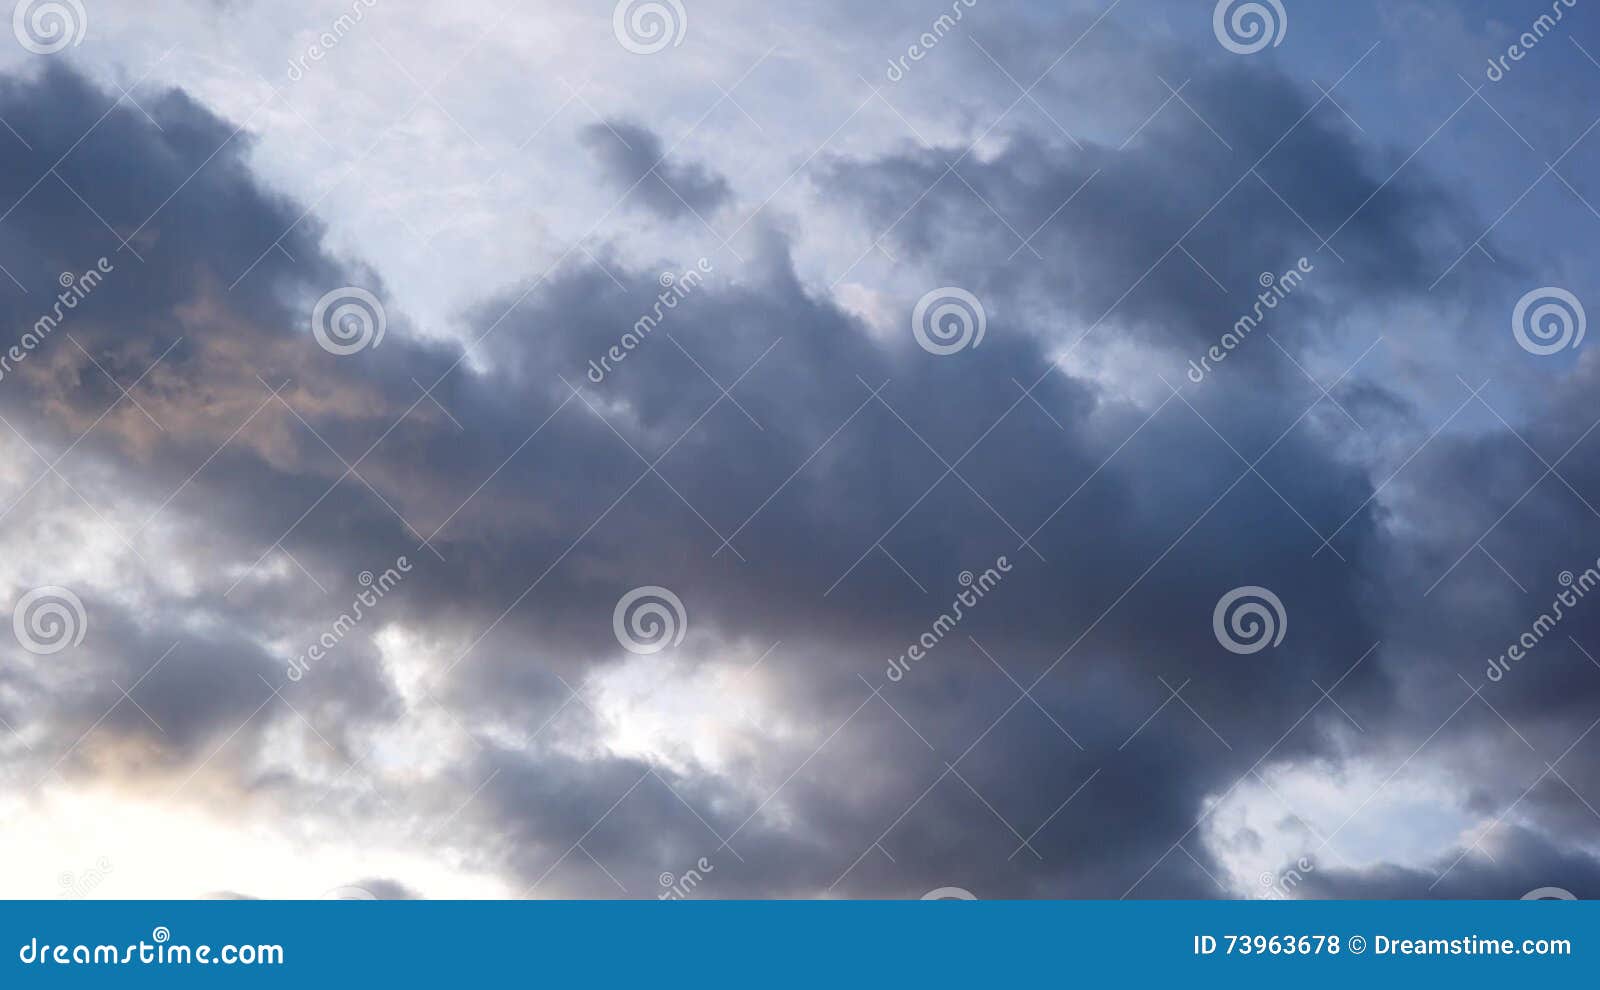 Heavy Clouds Float Across The Sky Quickly Tragic Sky Time Lapse High Speed Camera Shot Full Hd 1080p Timelapse Stock Footage Video Of Cloudy Hail